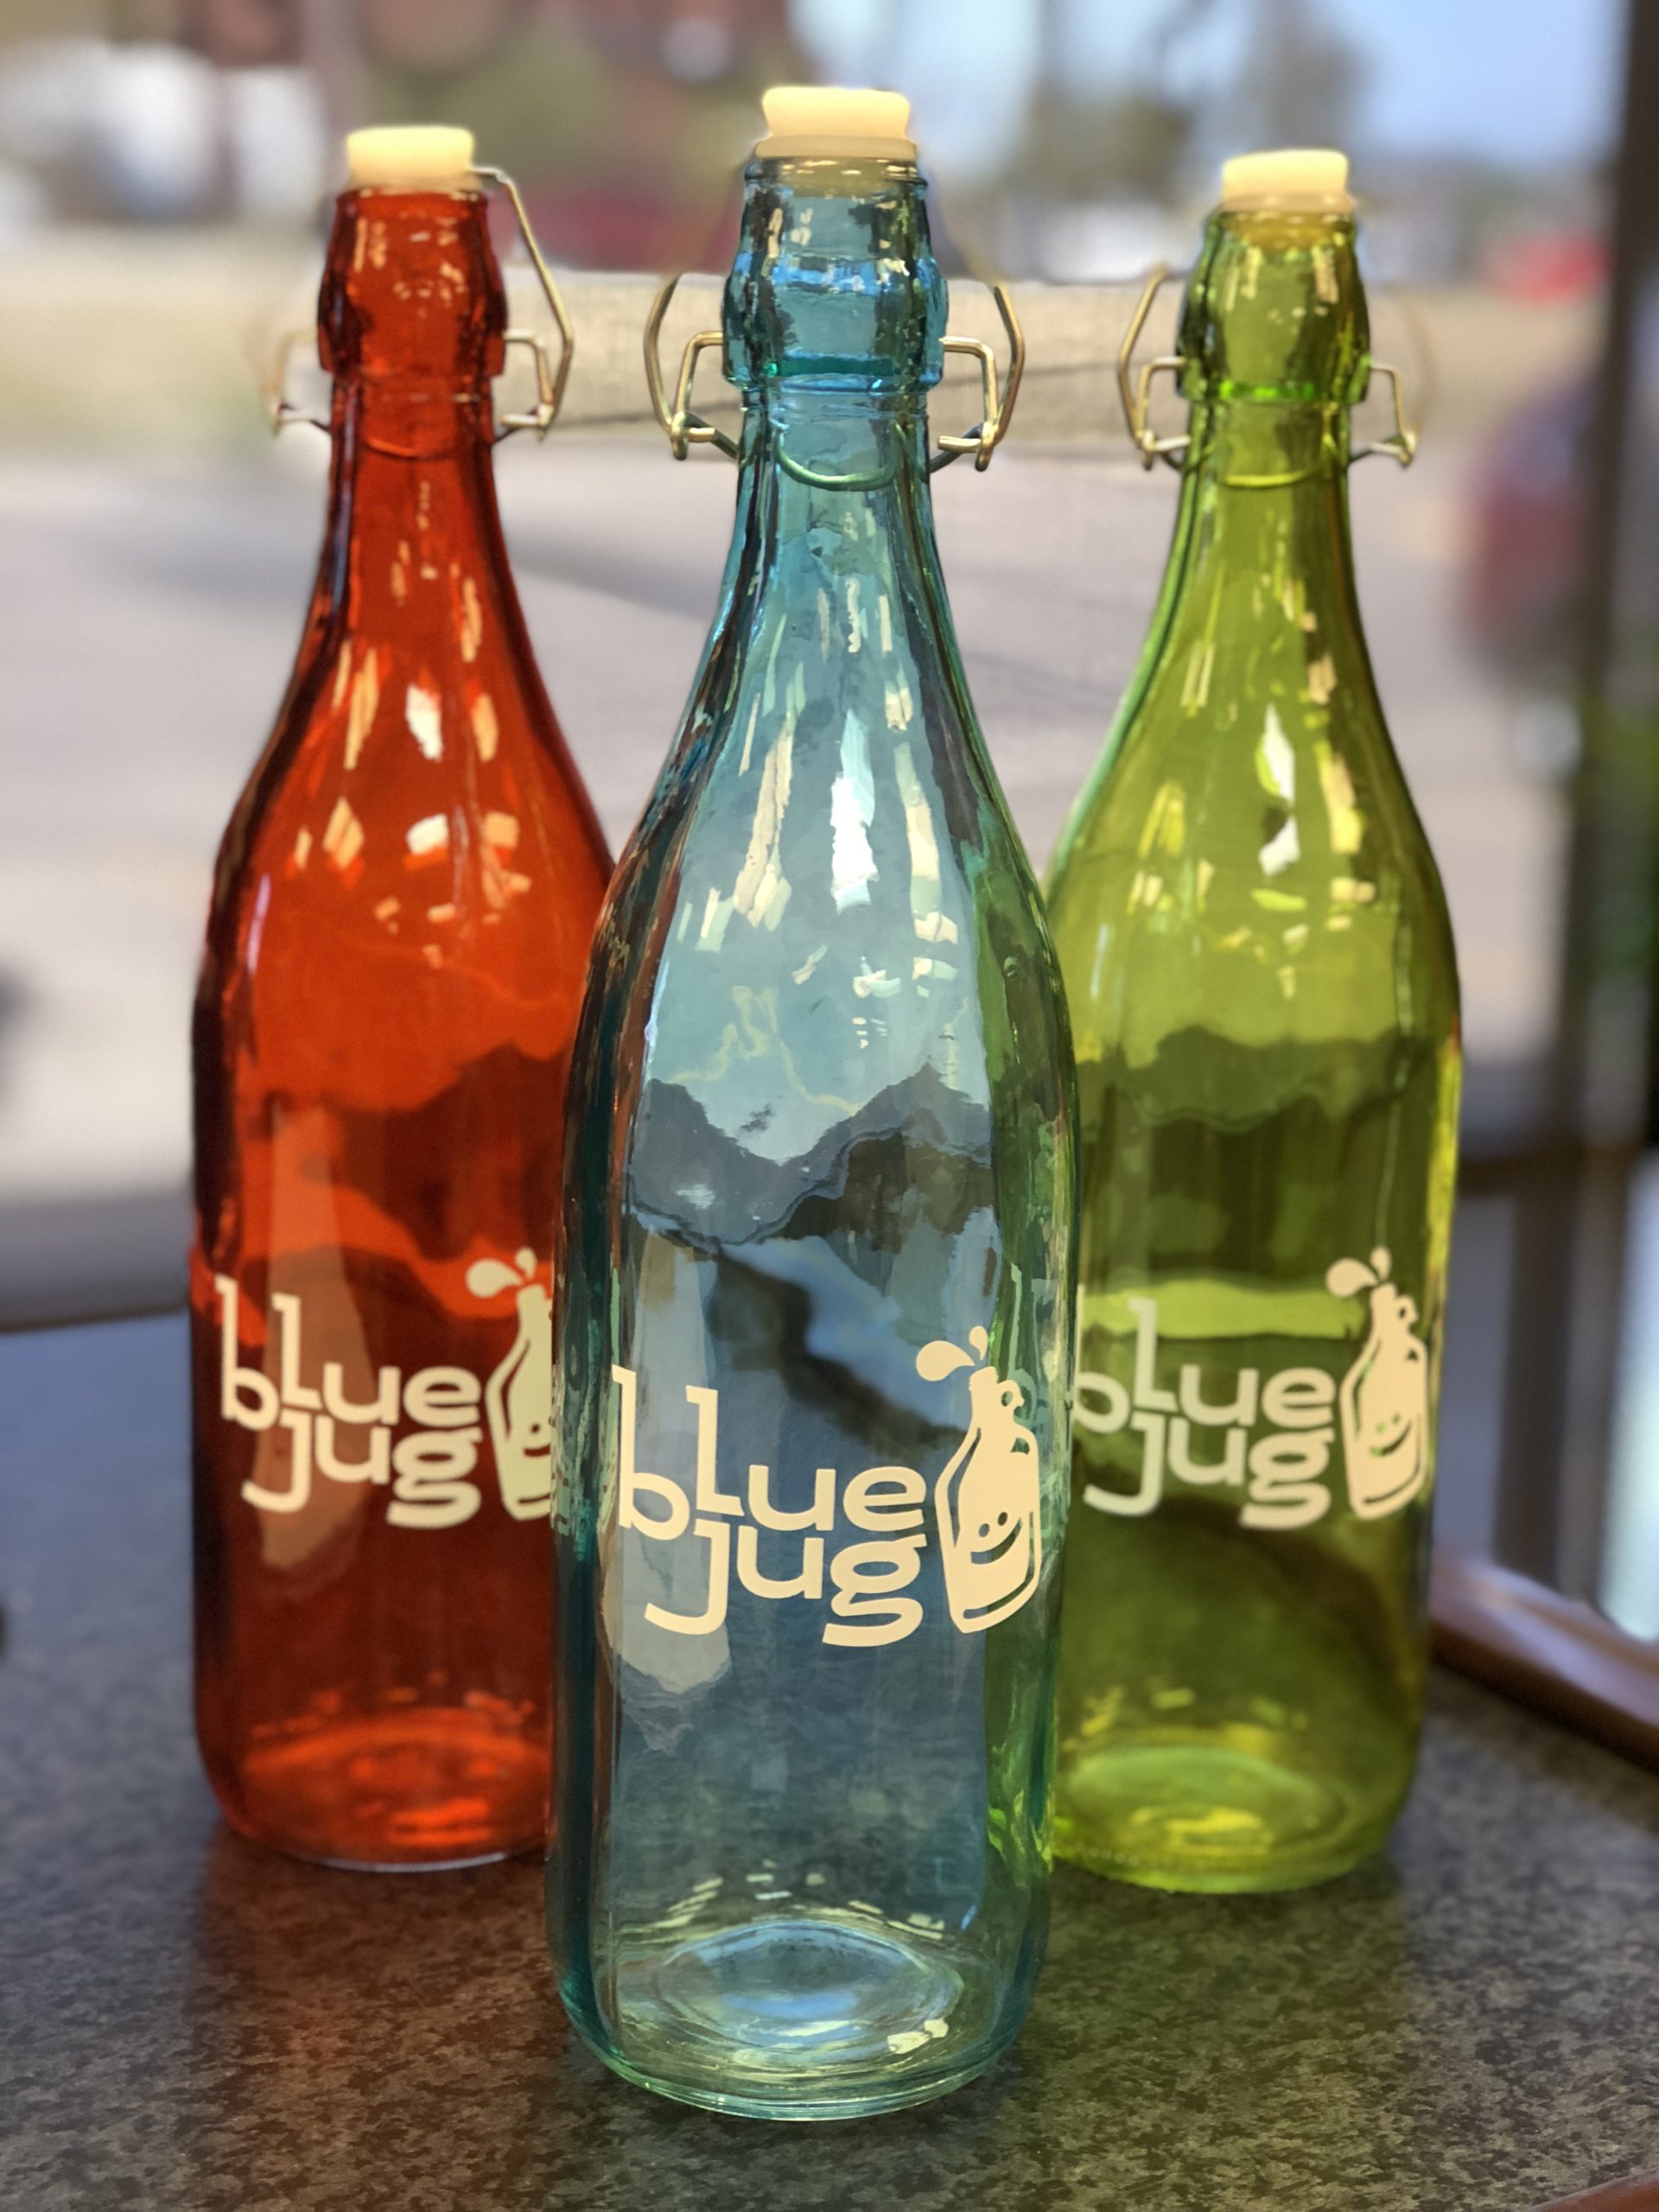 Three vibrant ‘blueJug’ bottles in red, blue, and green